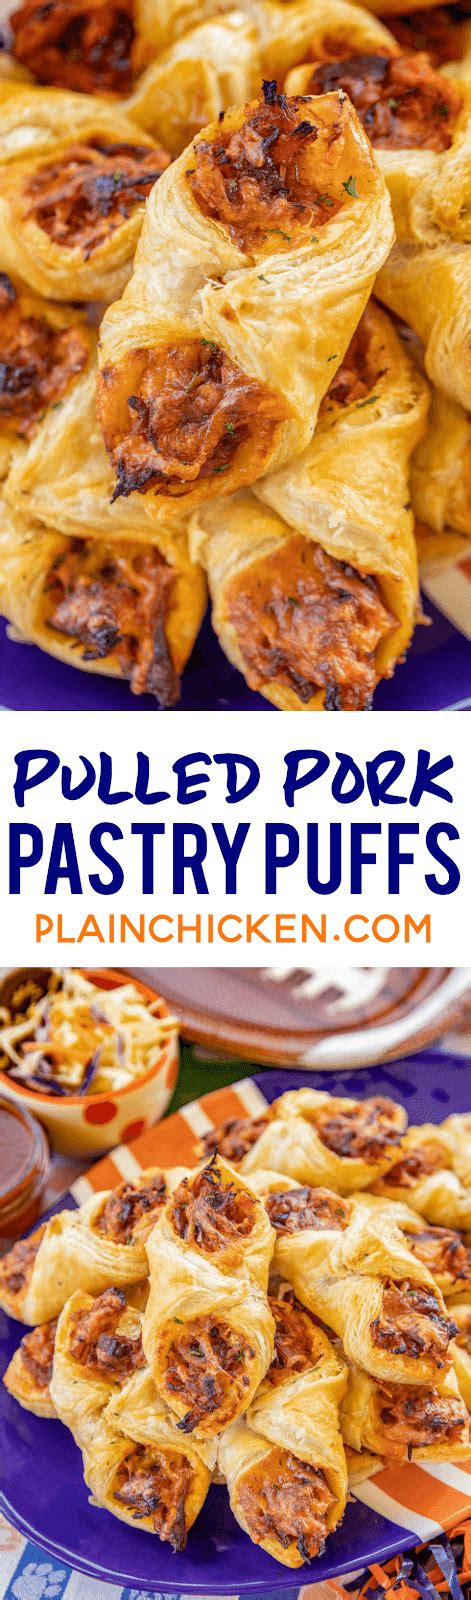 Lightly dust your clean work surface with flour and unfold one puff pastry sheet on it. Pulled Pork Pastry Puffs - Football Friday | Plain Chicken®